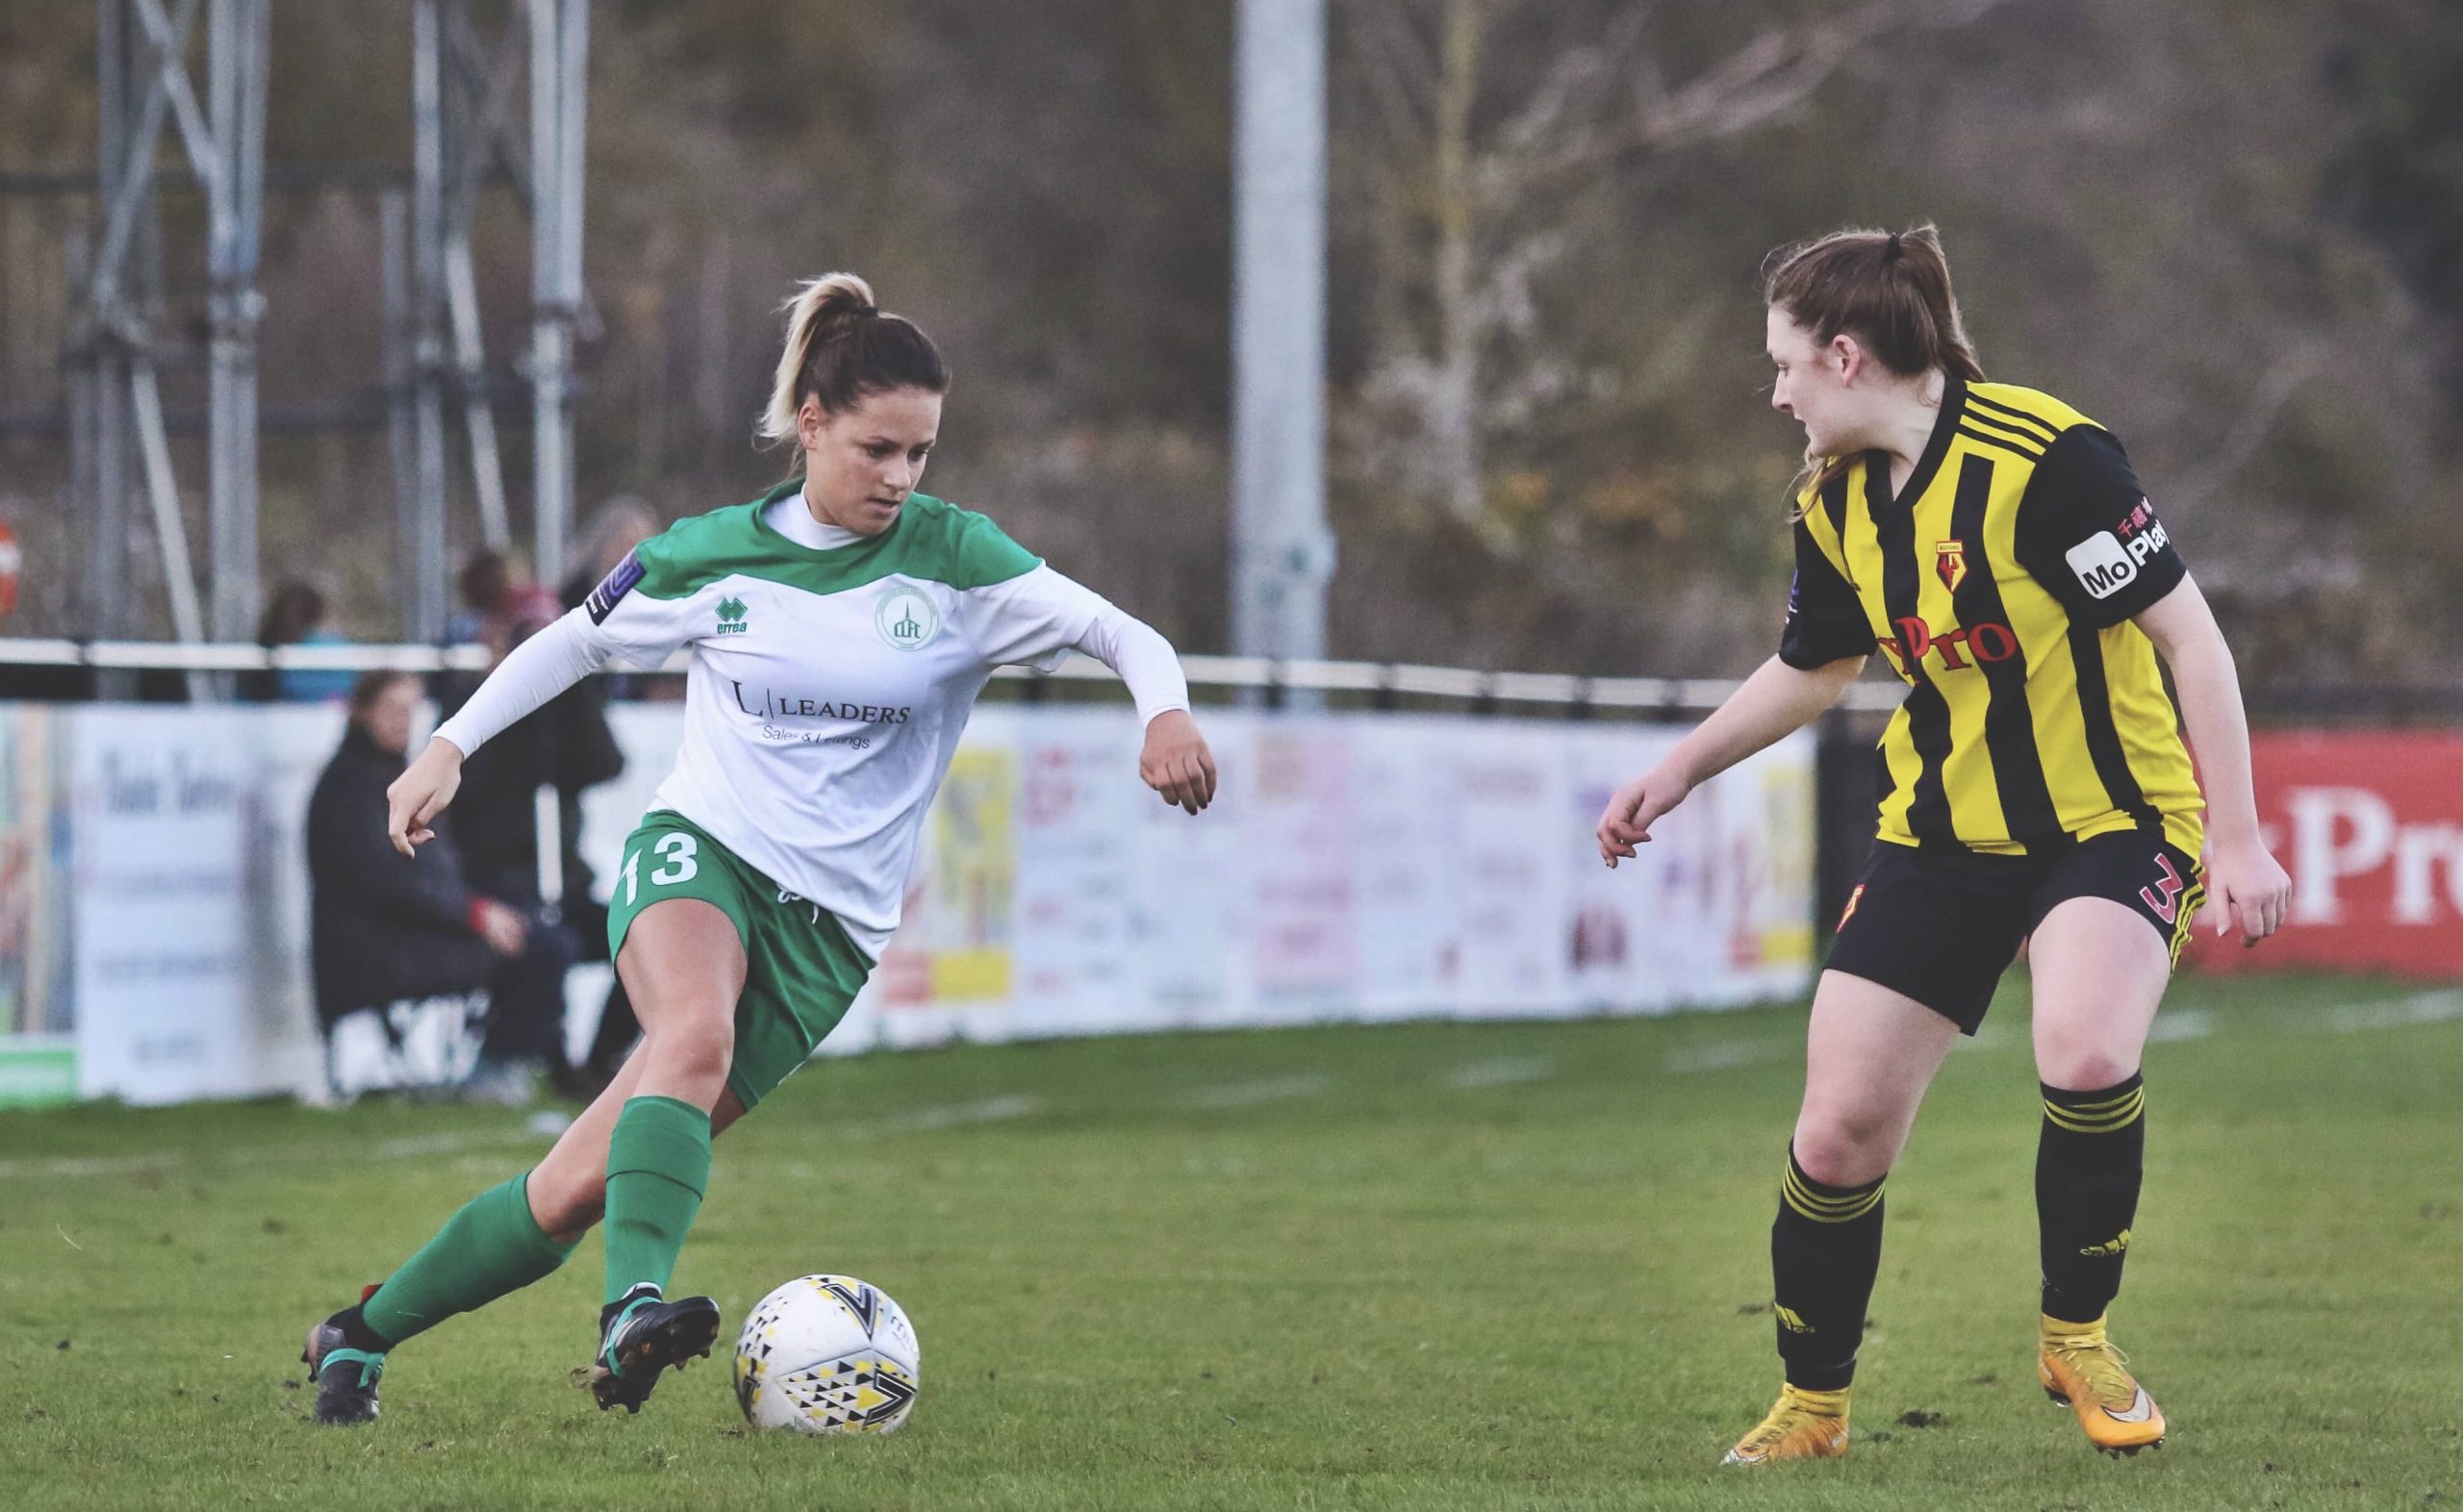 Chichester's Khassel takes on a Watford Ladies defender. Photo by Sheena Booker.